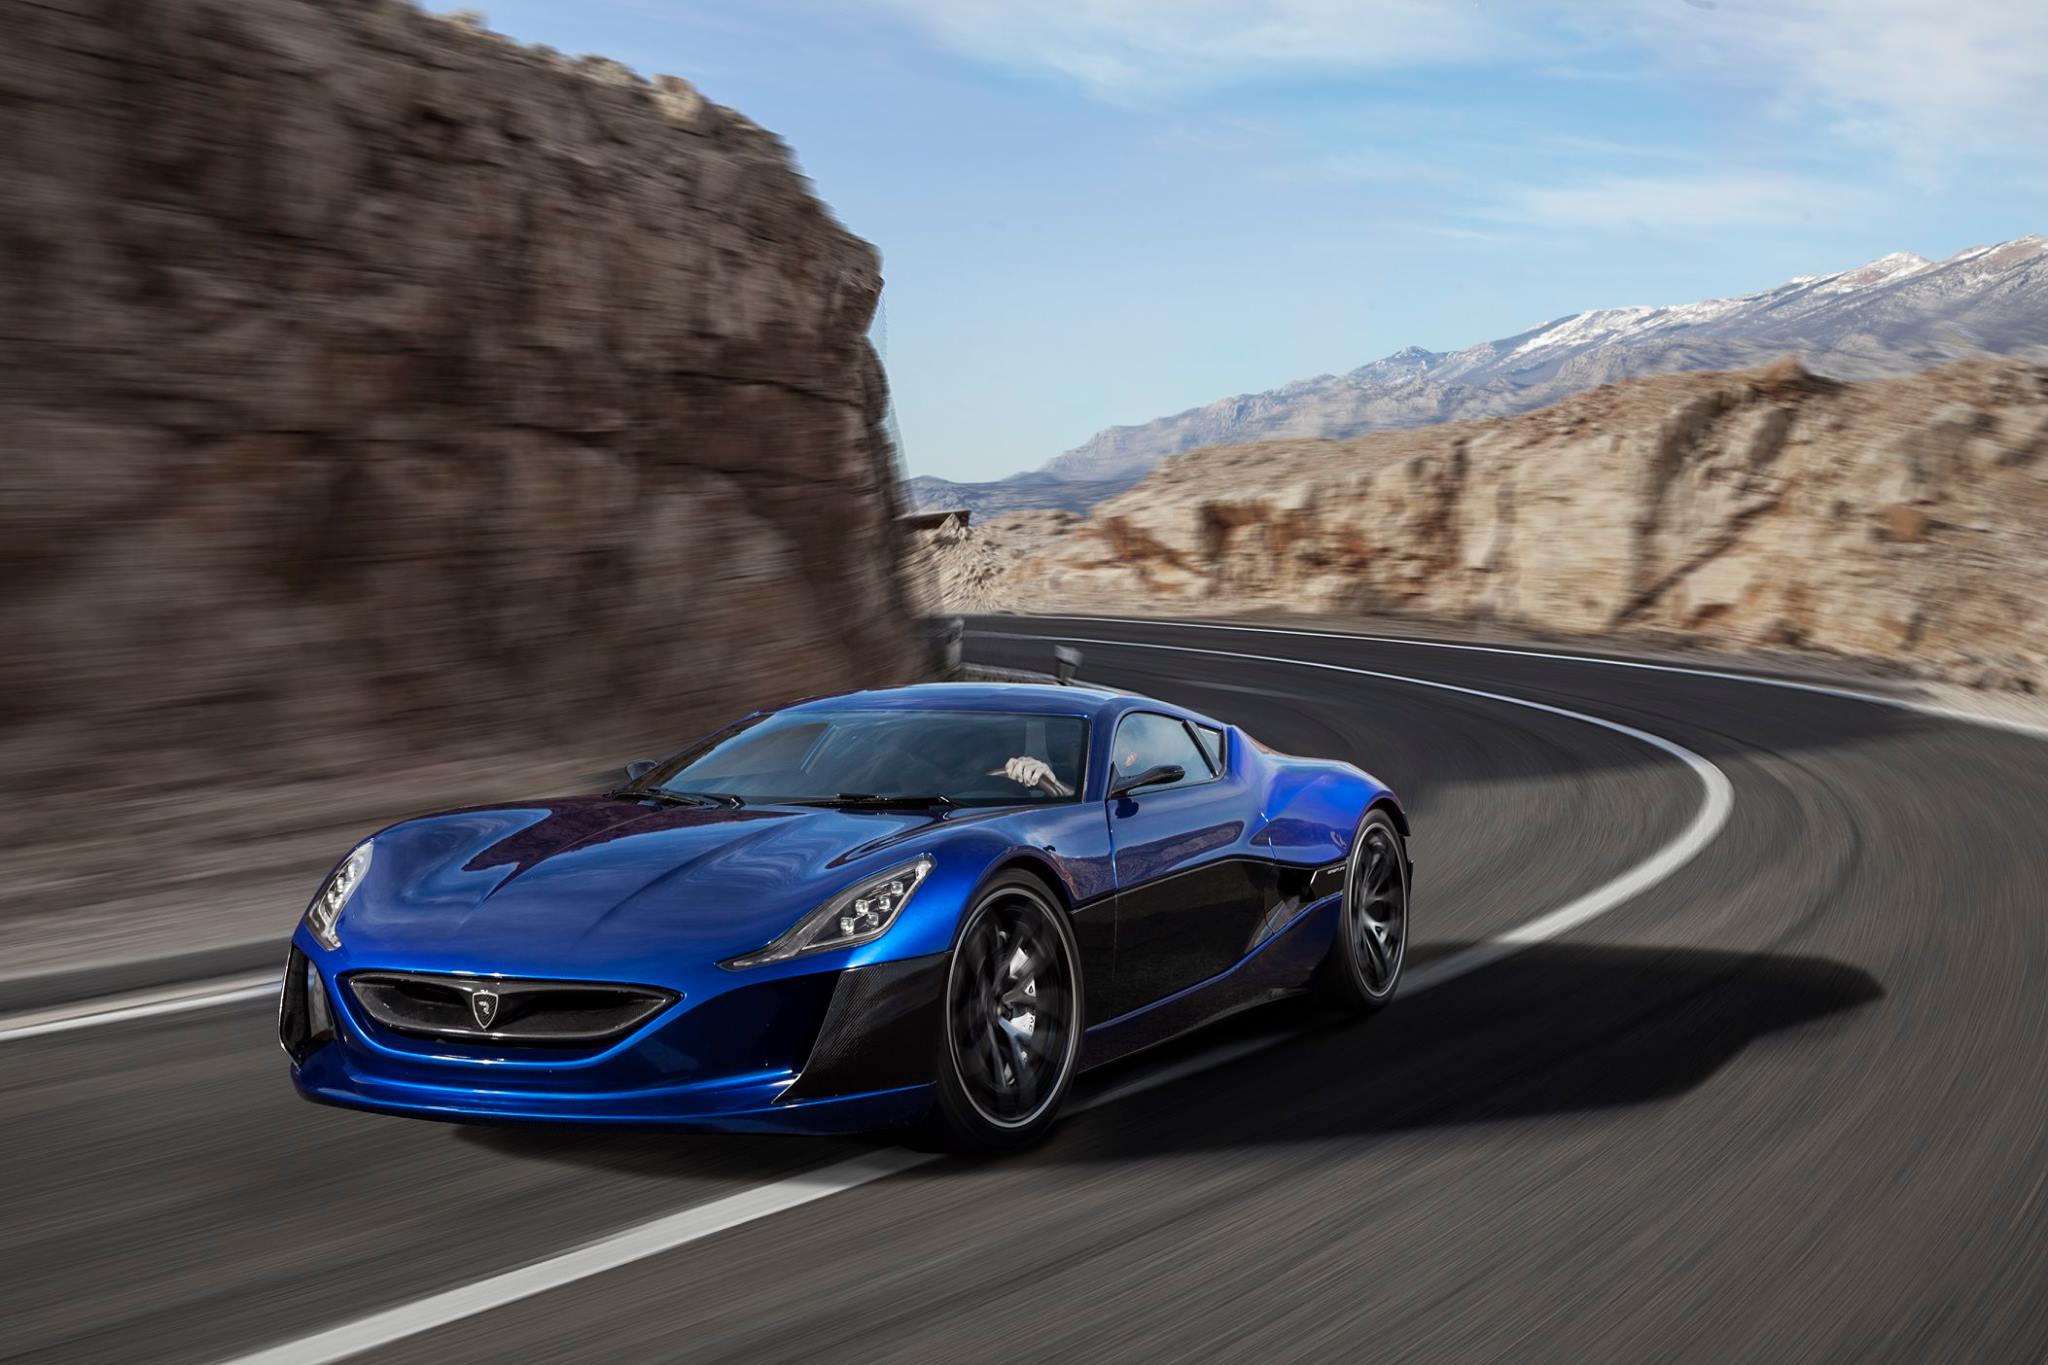 Stunning Rimac Concept Photoshoot In Pag Island